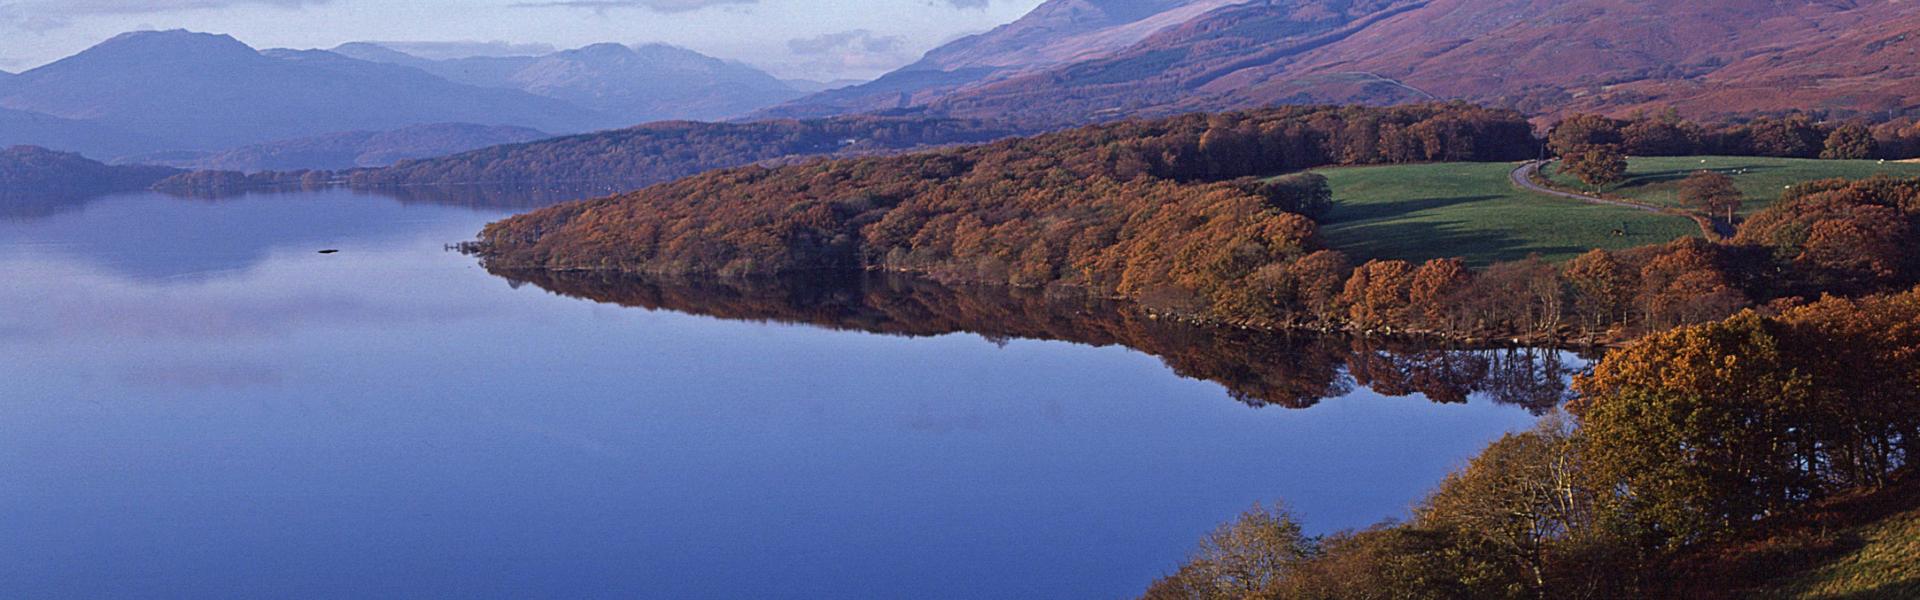 Holiday lettings & accommodation in the Loch Lomond & The Trossachs National Park - Wimdu